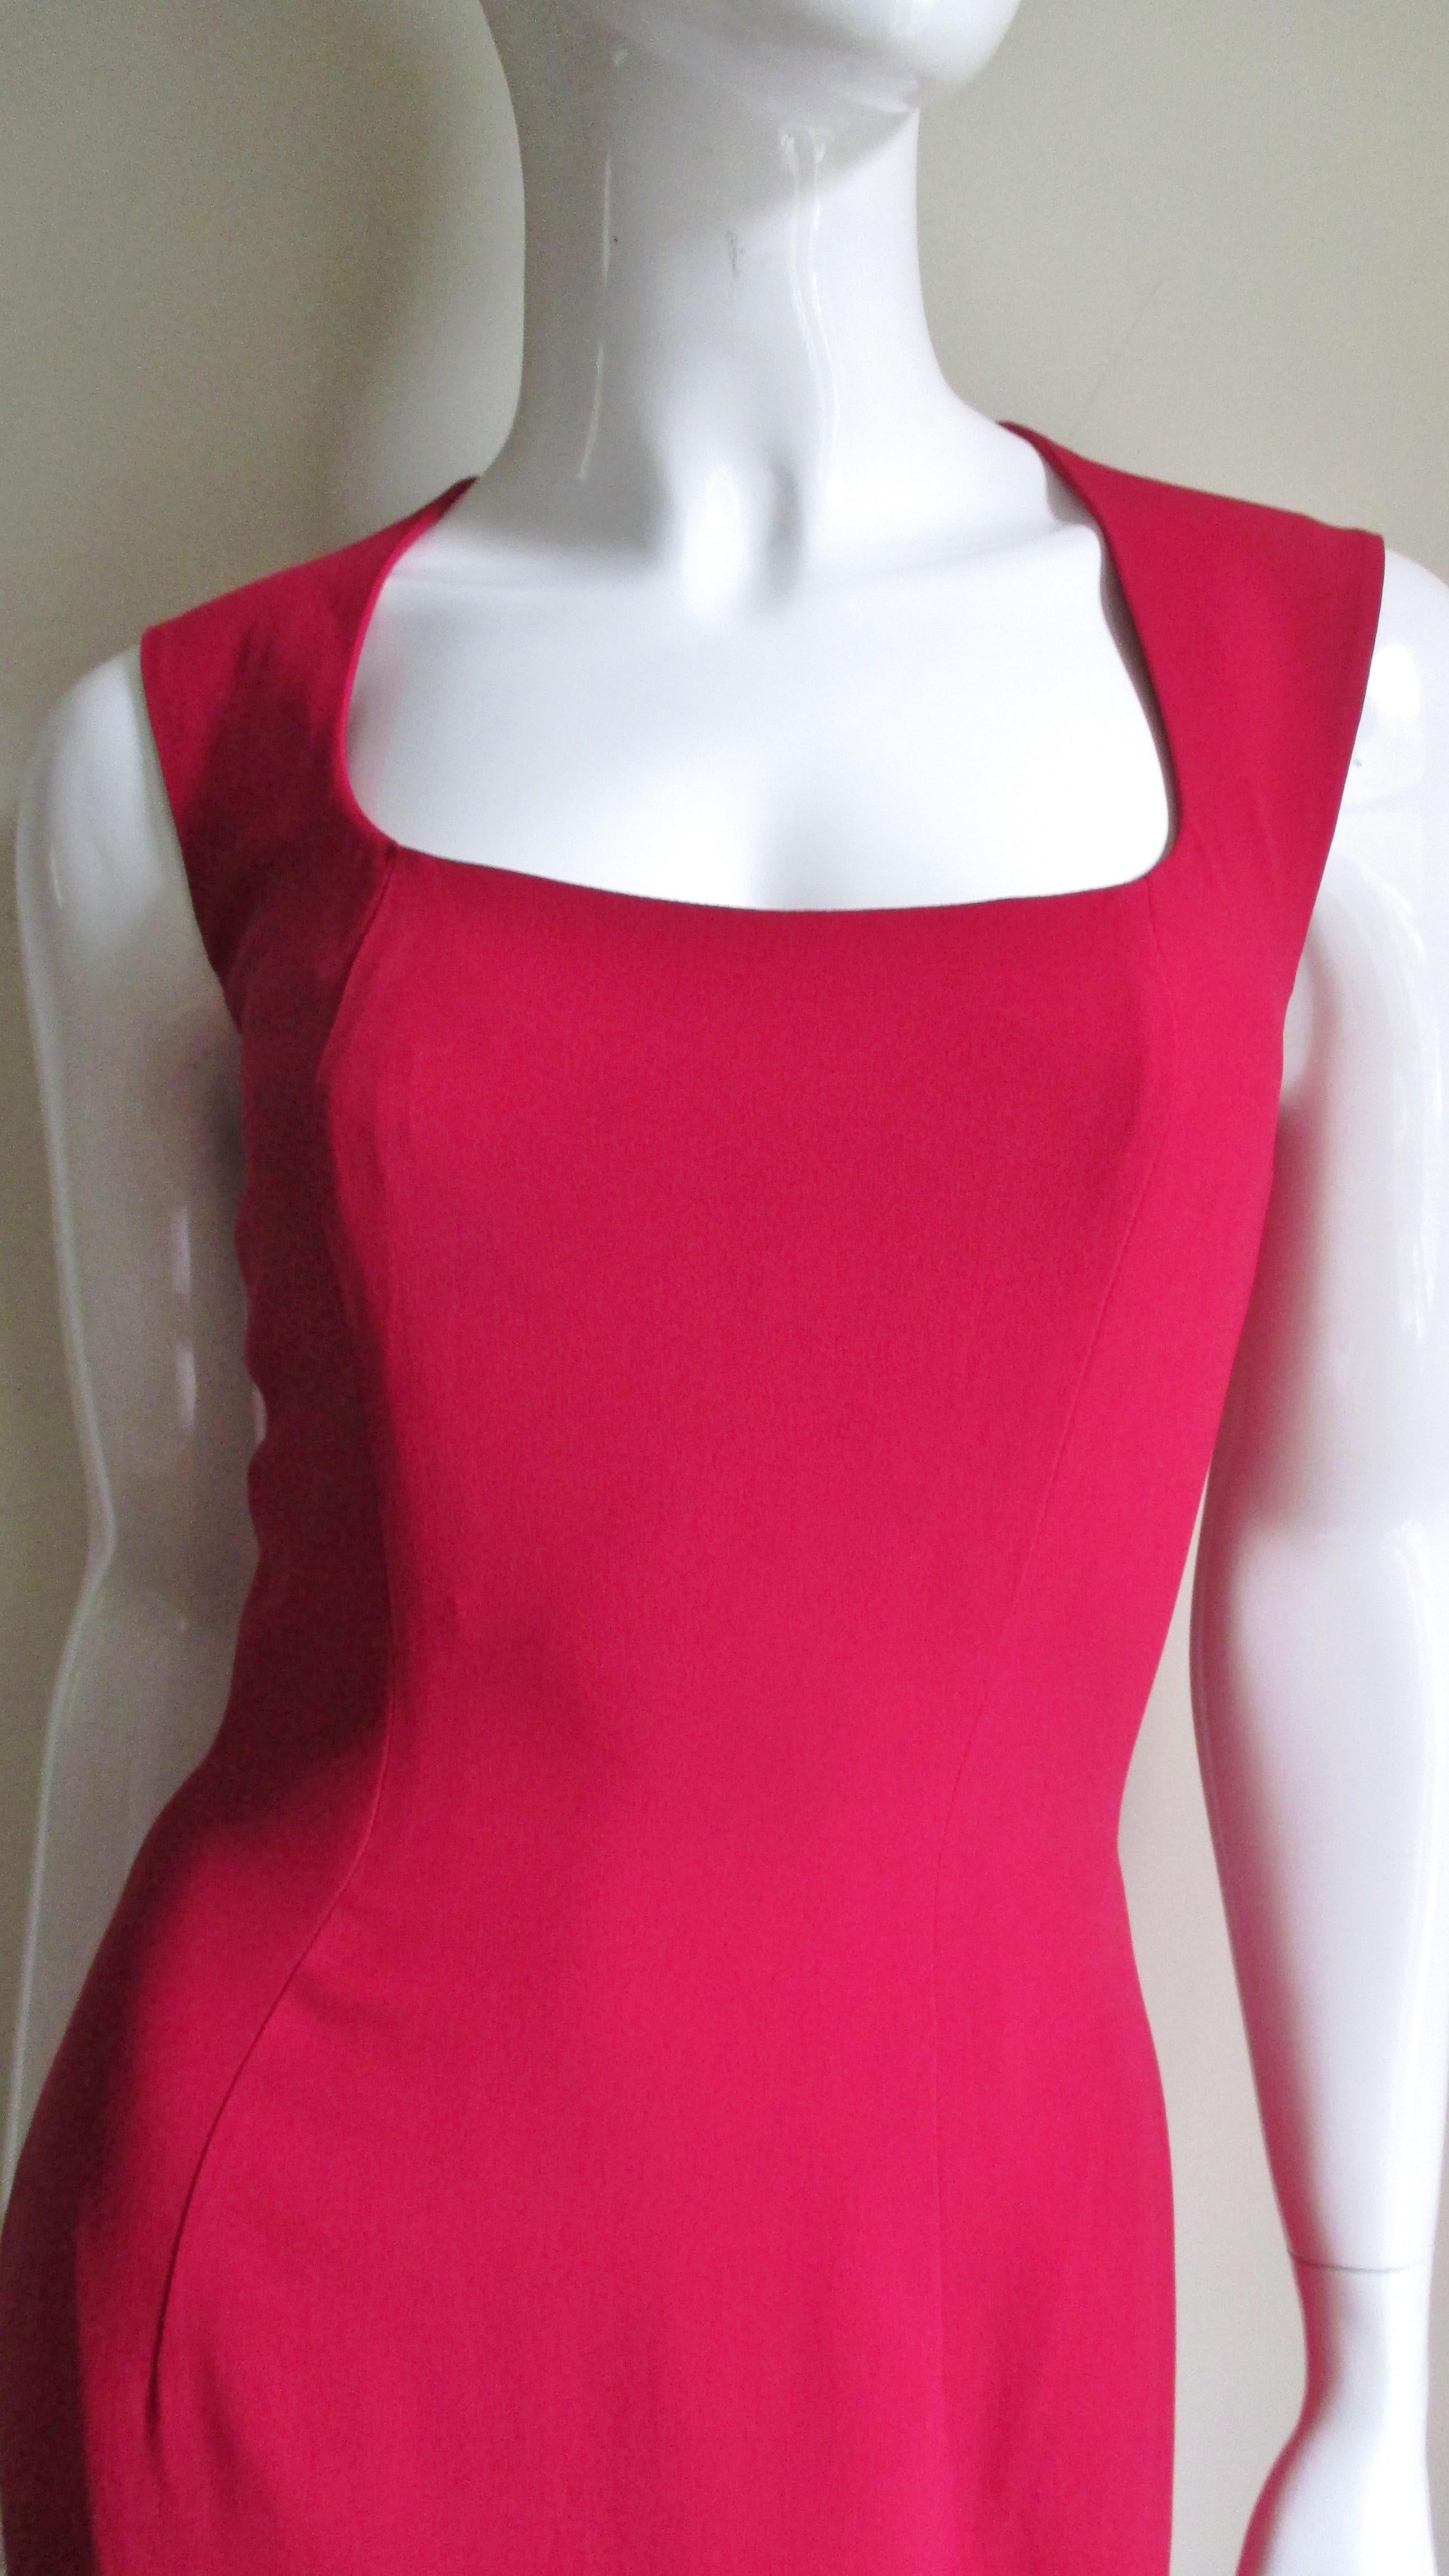 Sophie Stibon Dress with Back Cut outs 1980s In Good Condition For Sale In Water Mill, NY